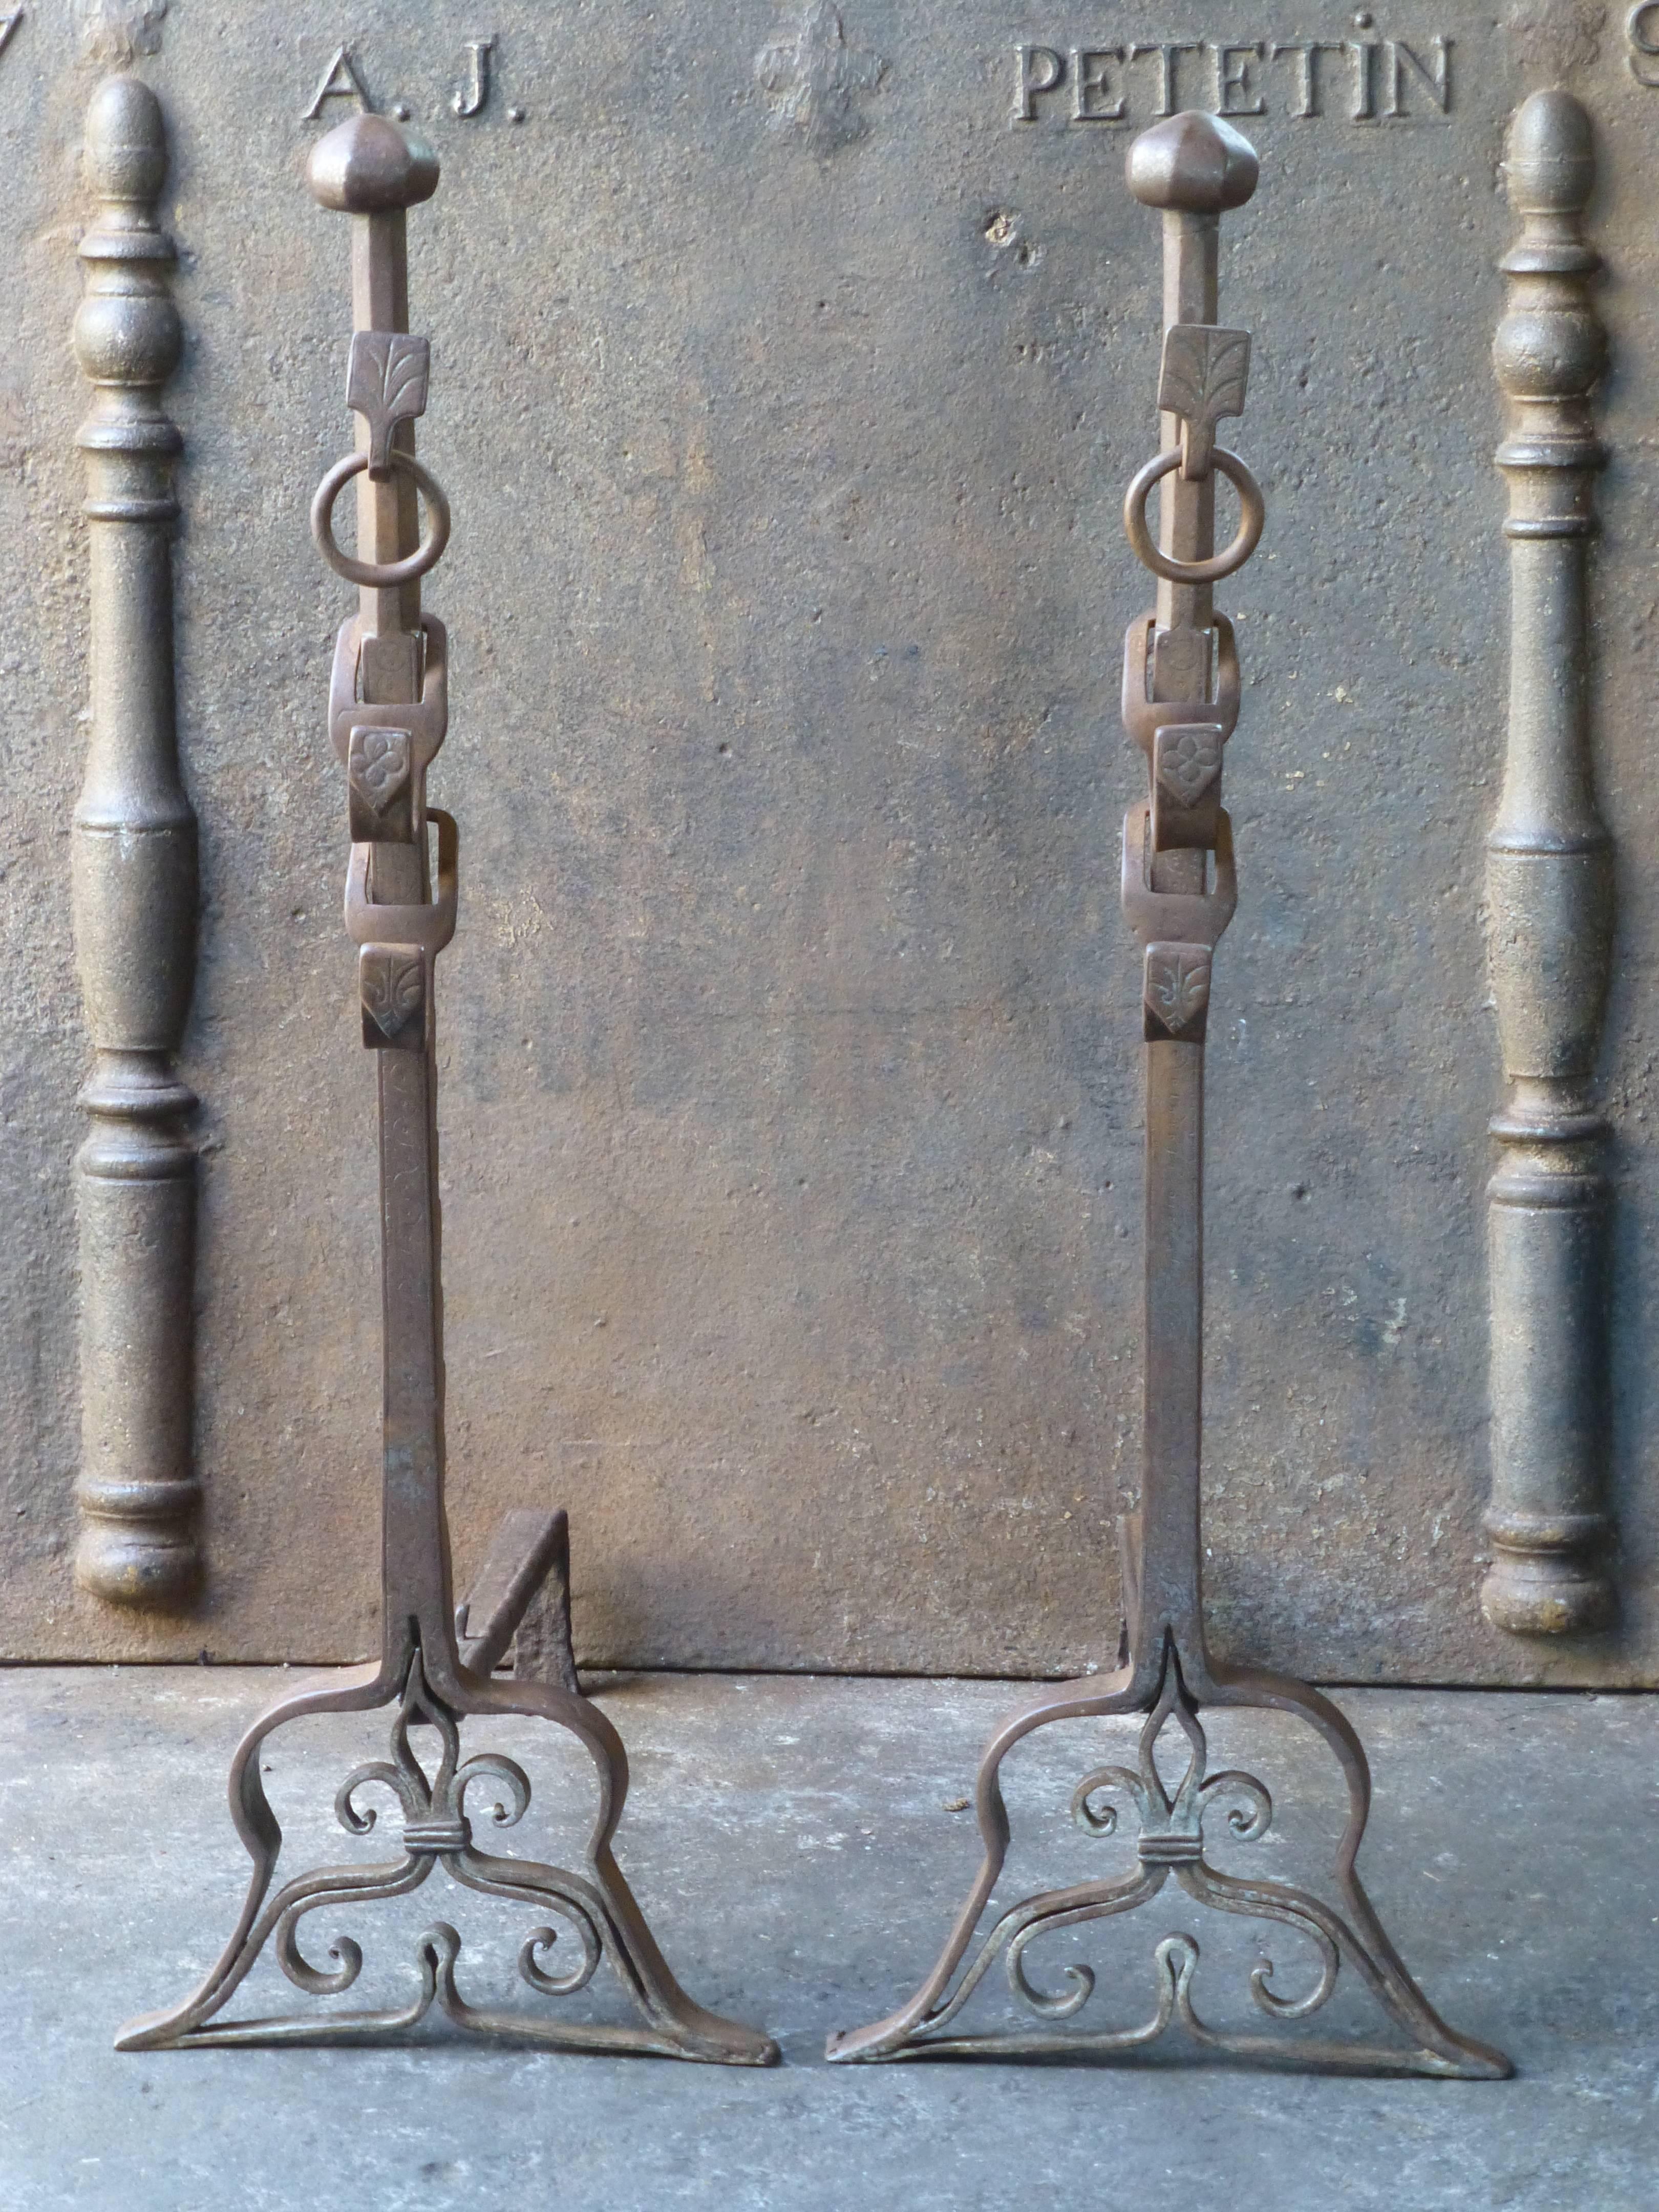 19th century French Napoleon III period fire dogs made of wrought iron. These French andirons are called 'landiers' in France. This dates from the times the andirons were the main cooking equipment in the house. They had spit hooks to grill meat or